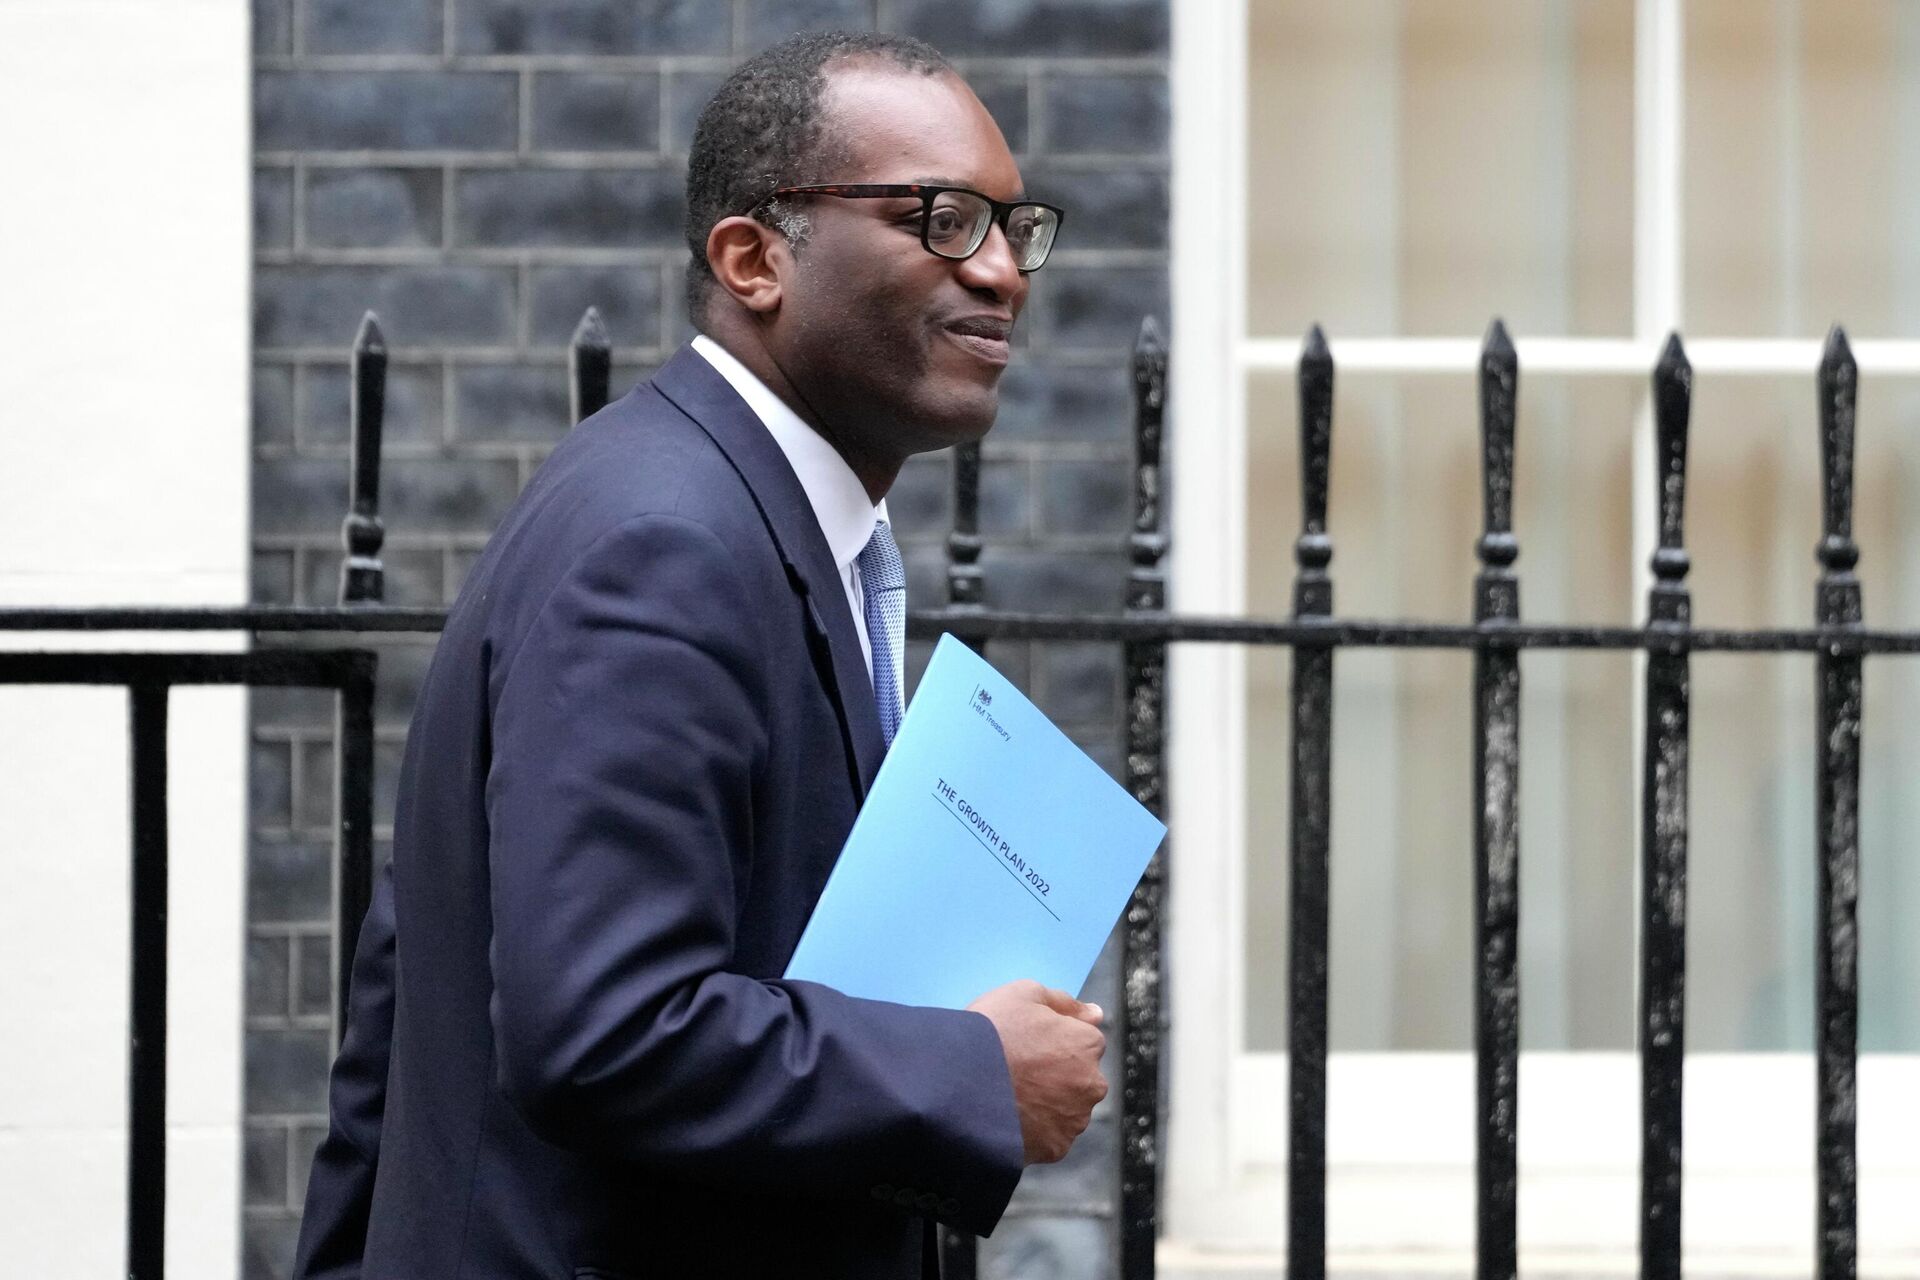 Britain's Chancellor Kwasi Kwarteng leaves 11 Downing Street in London, Friday, Sept. 23, 2022. The Chancellor will deliver a mini budget in parliament. - Sputnik International, 1920, 14.10.2022